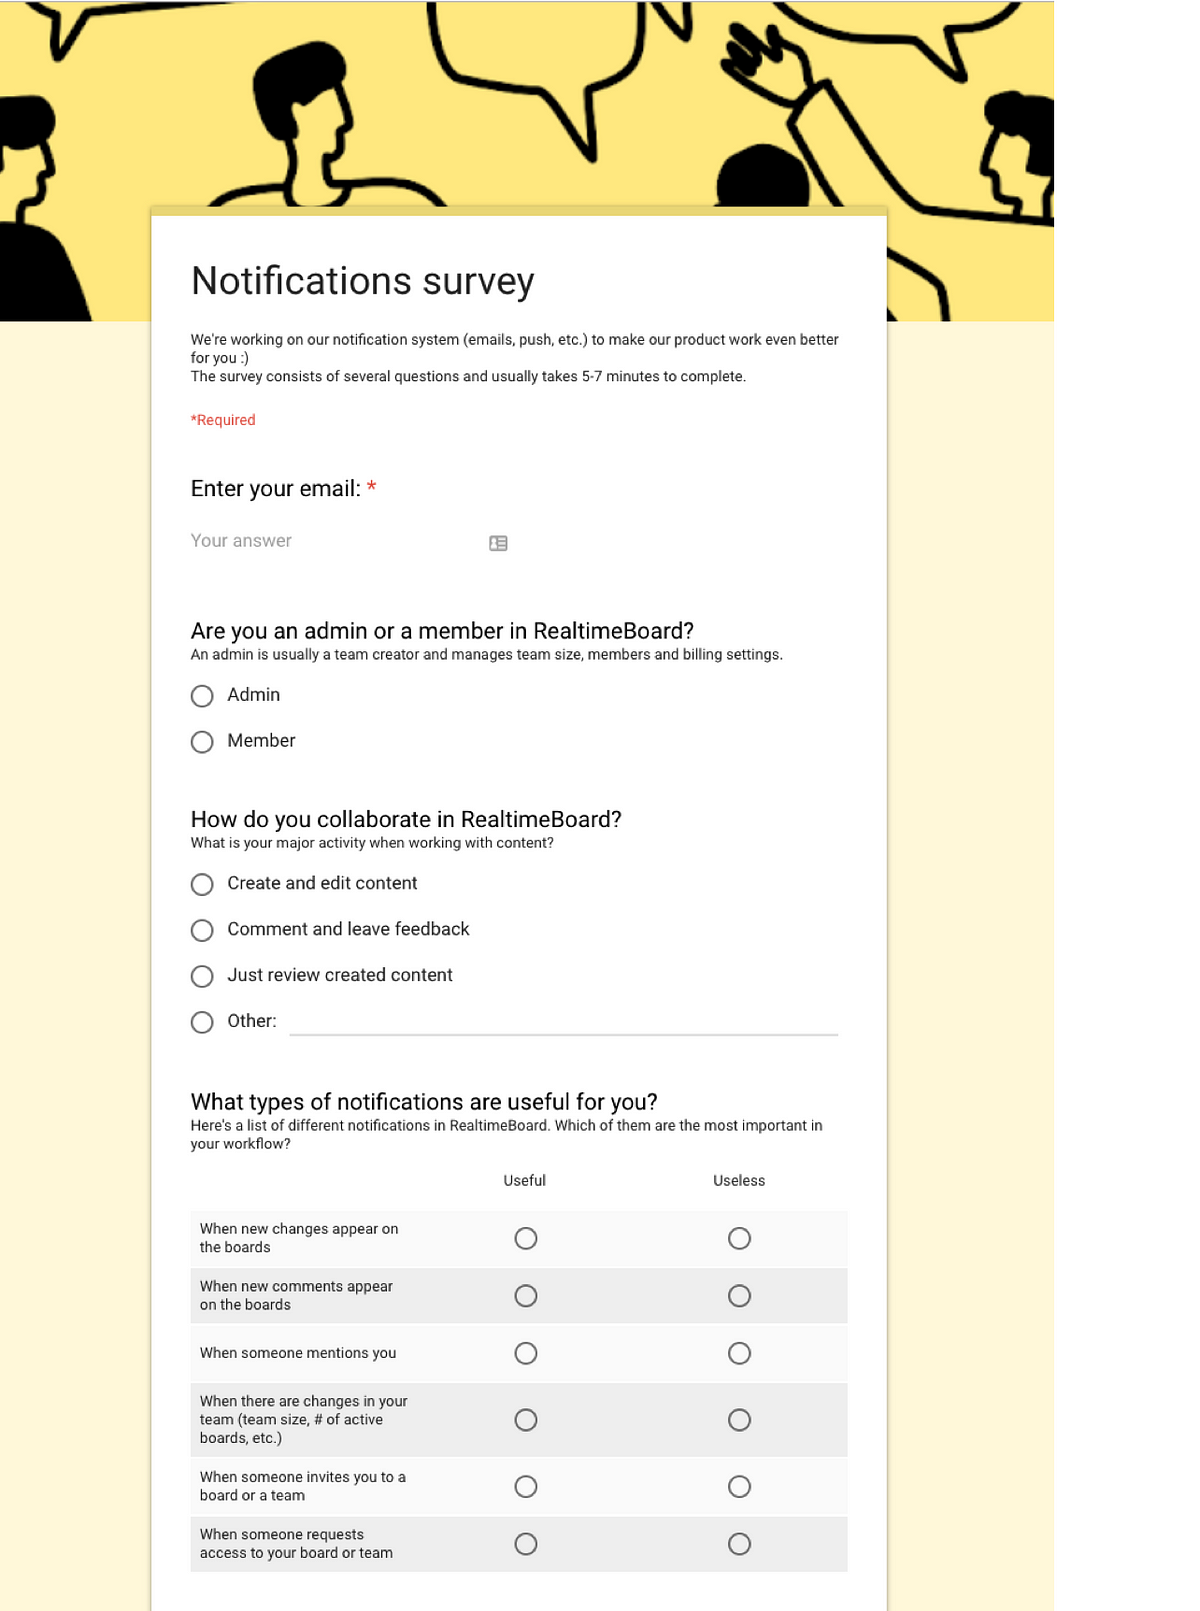 user research survey questions